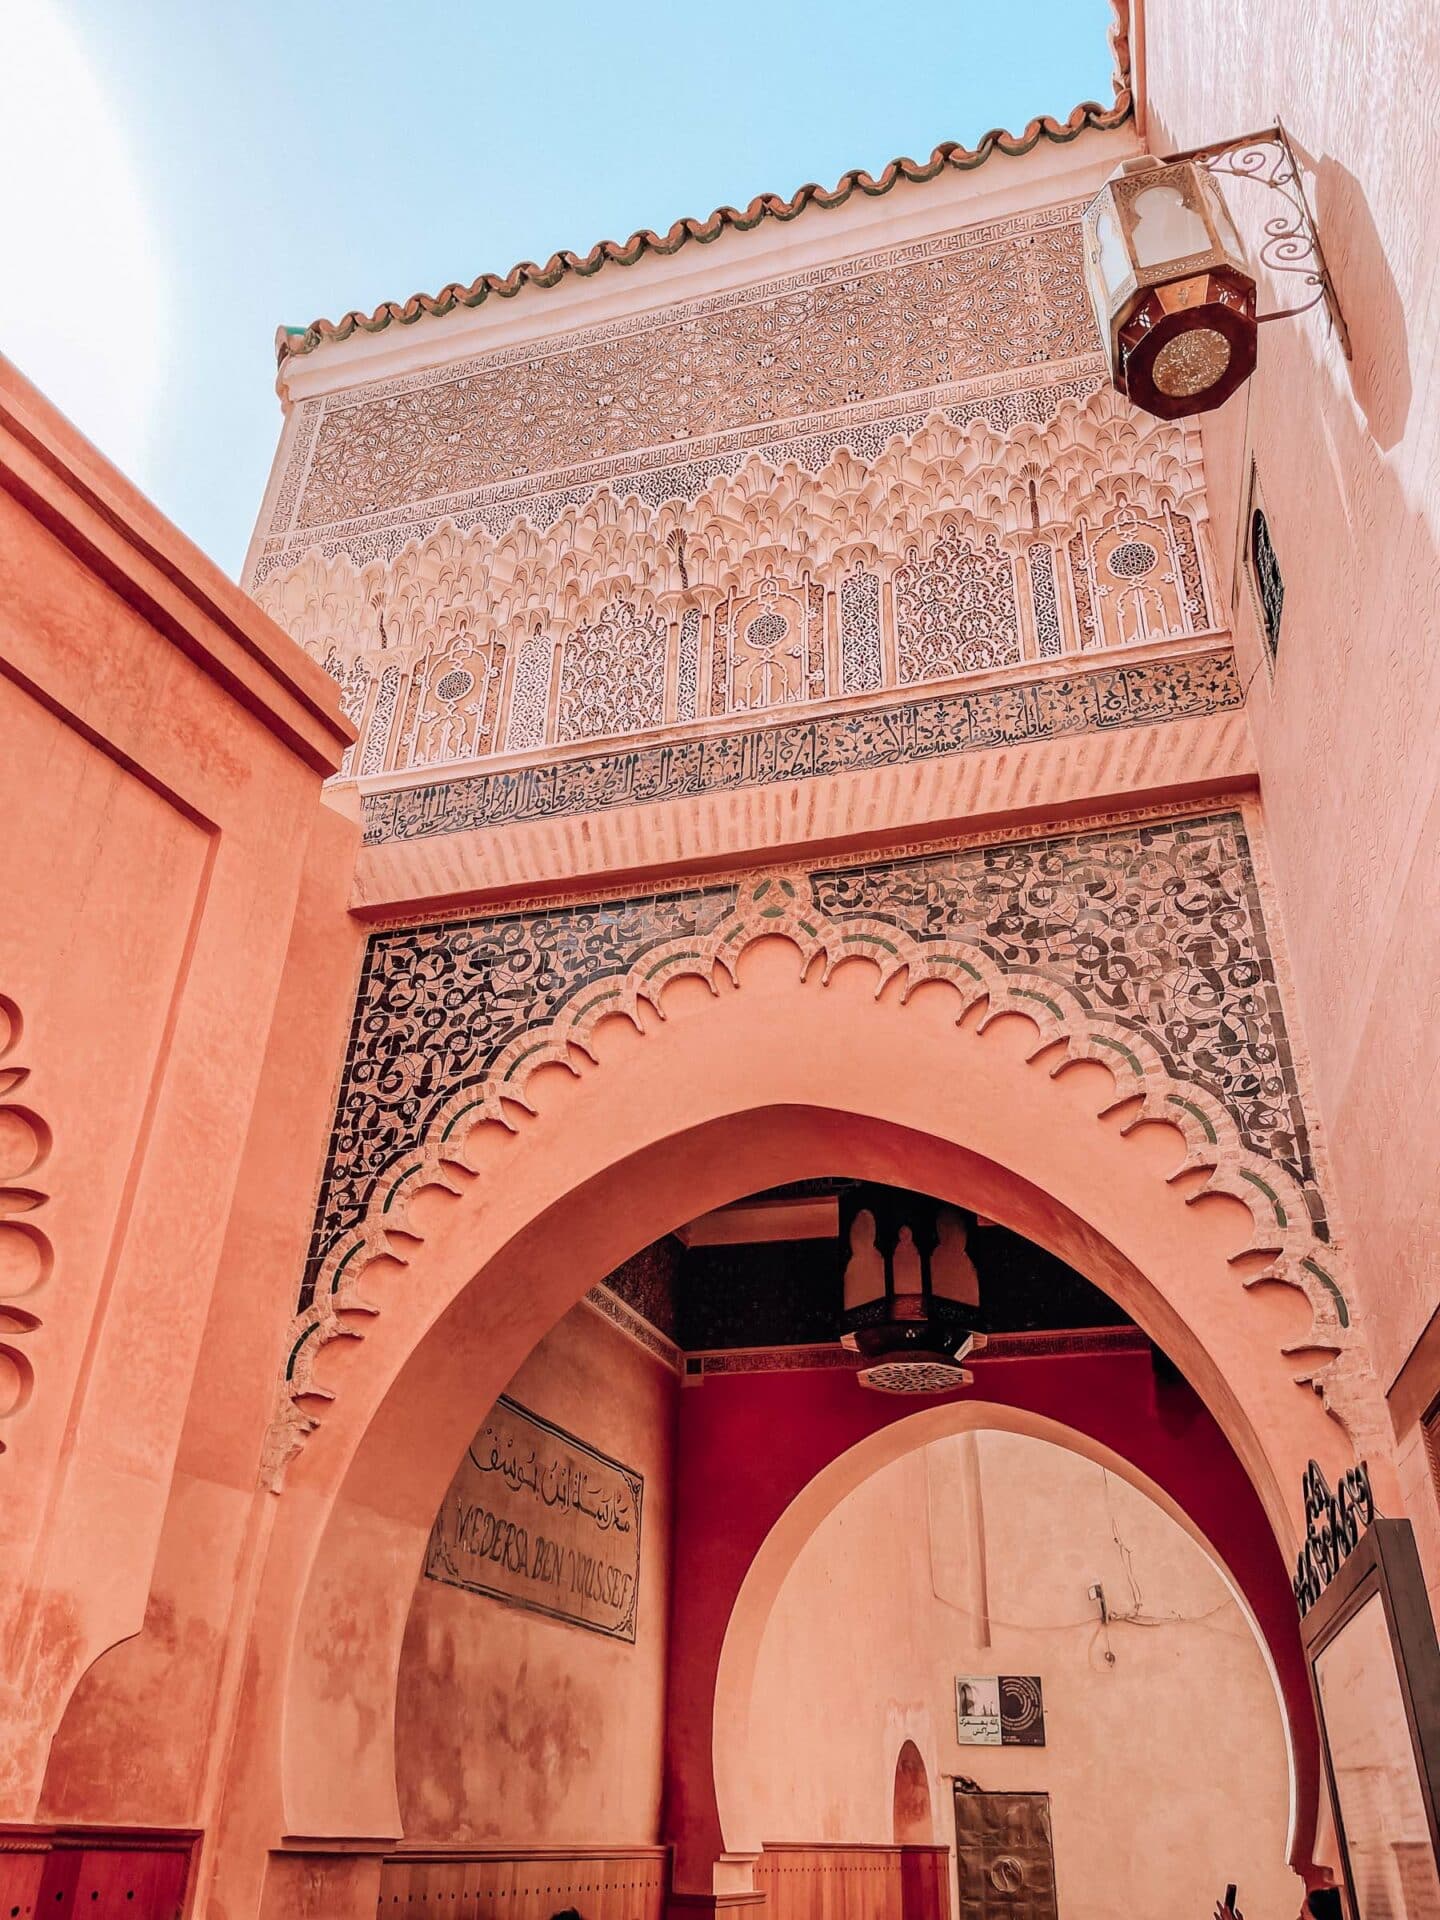 The perfect 9 Day Morocco itinerary by travel blogger What The Fab